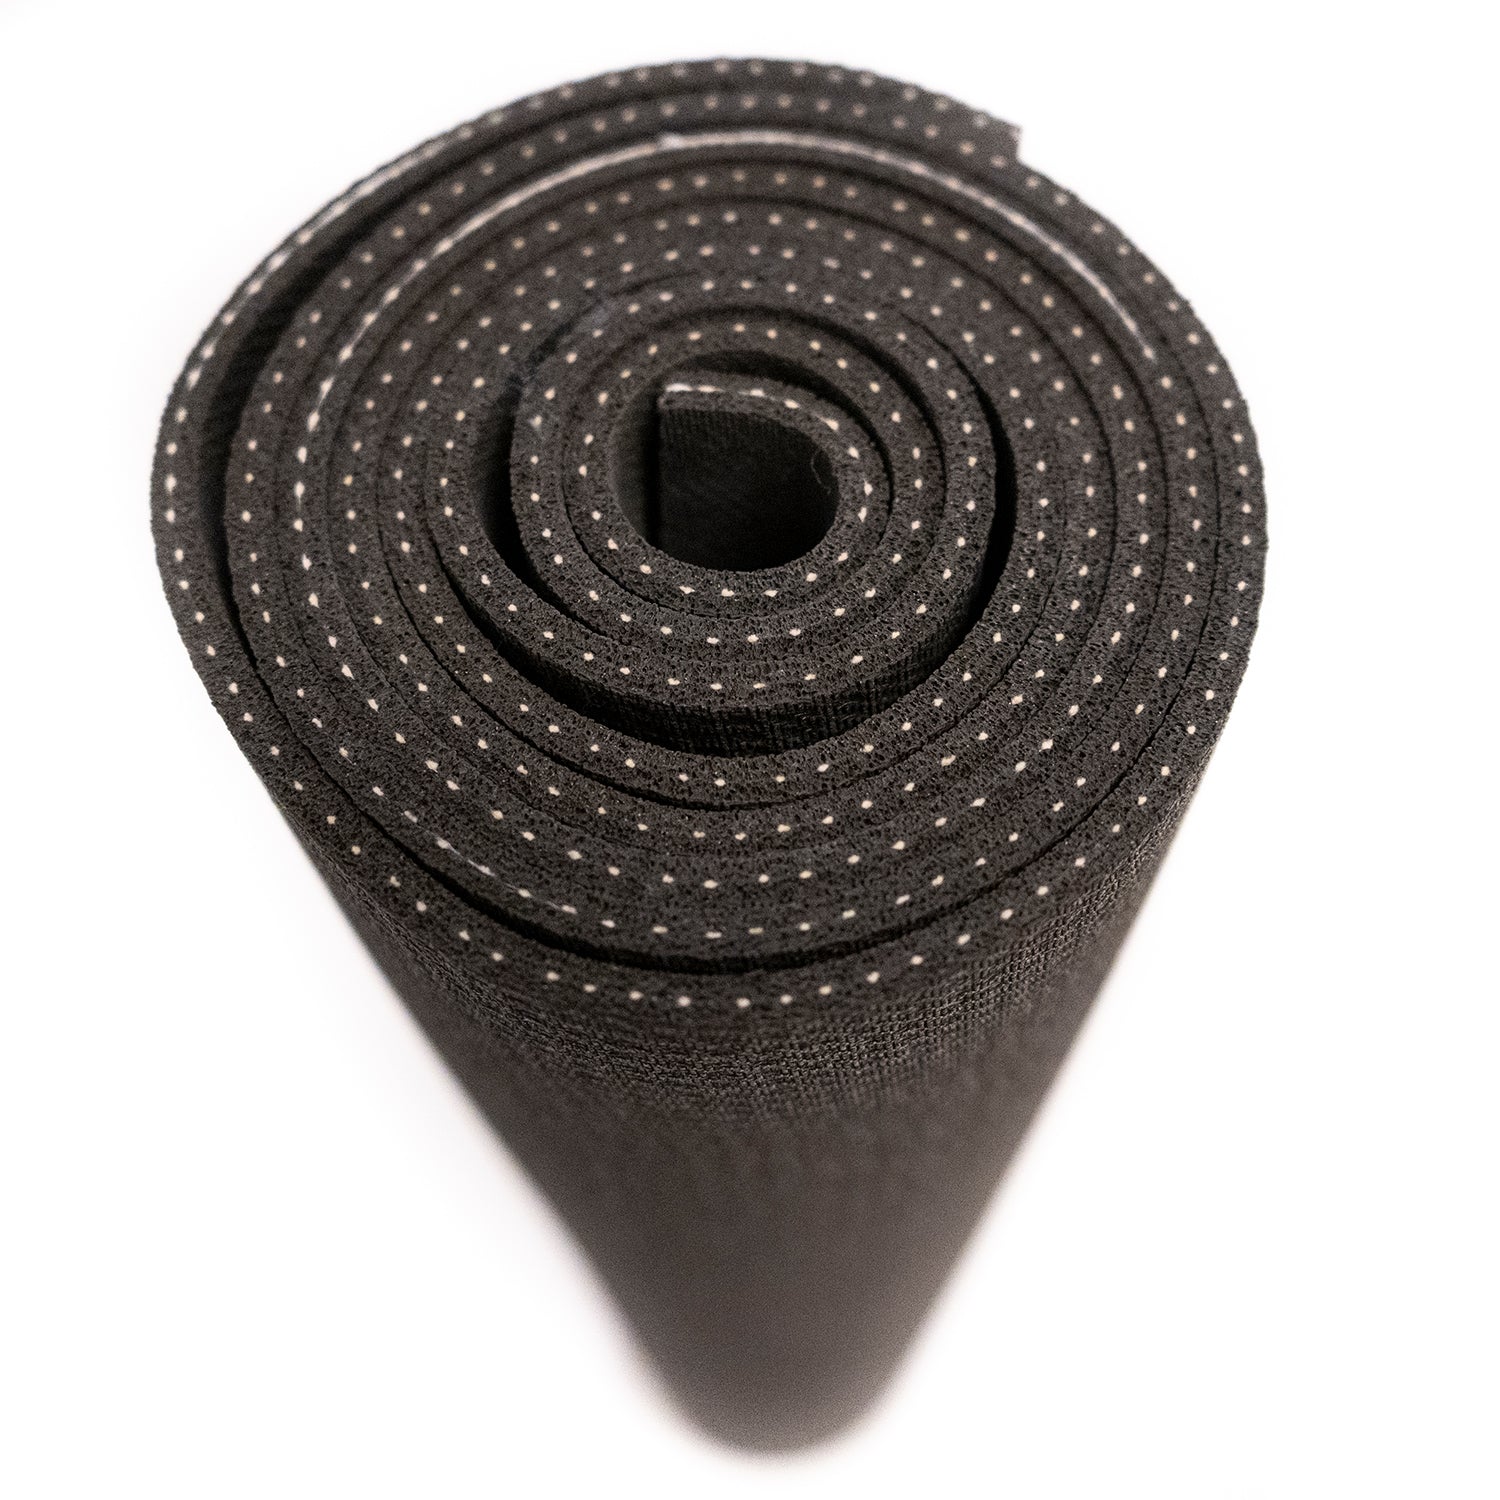 Natural Rubber Yoga Mat by YOGA Accessories